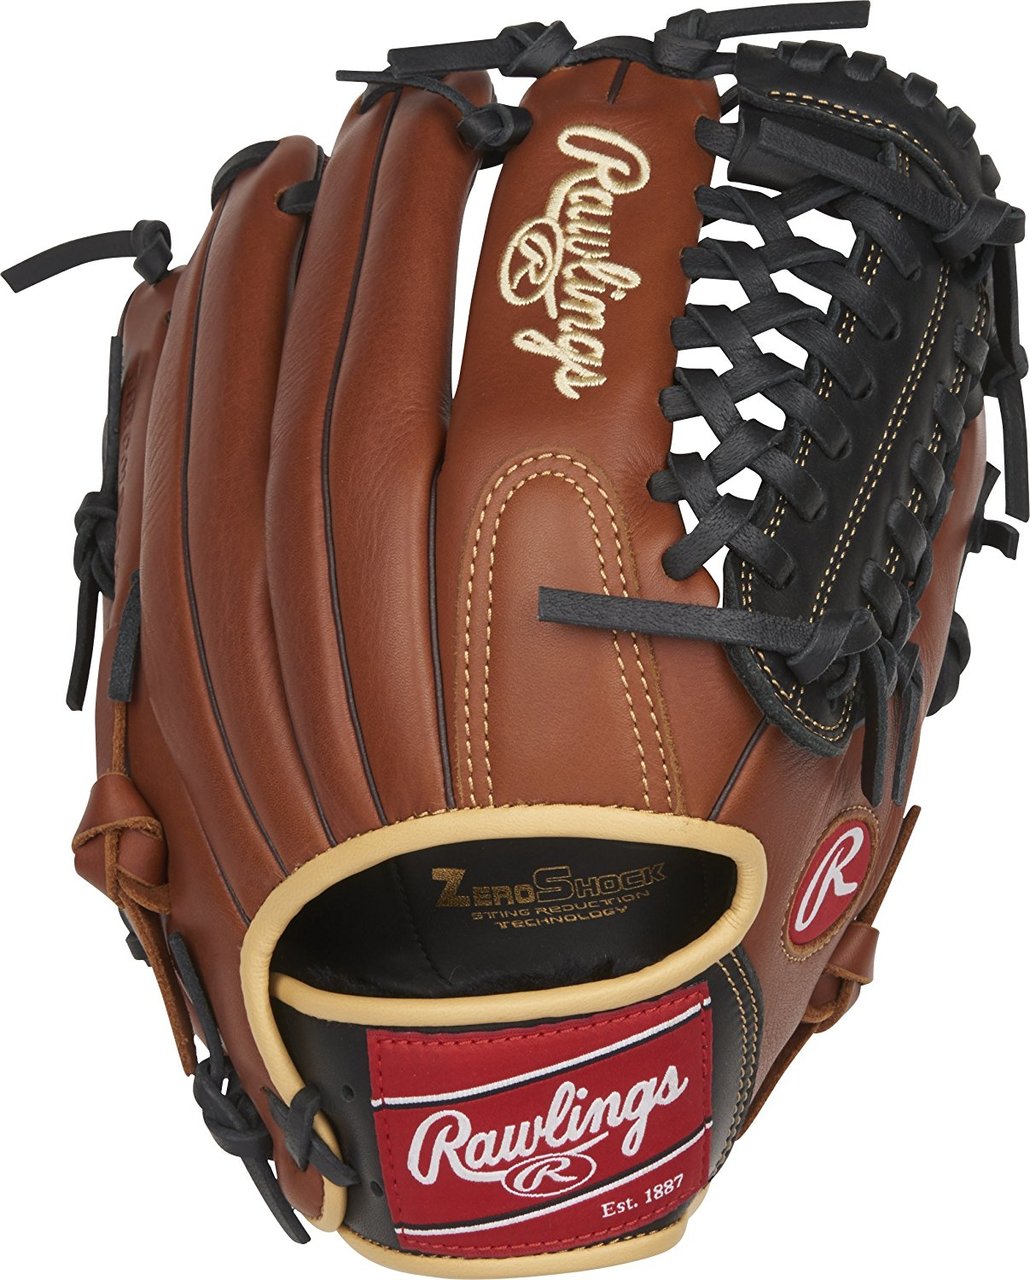 rawlings-sandlot-s1175mt-baseball-glove-11-75-right-hand-throw S1175MT-RightHandThrow Rawlings 083321369506 The Sandlot Series gloves feature an oiled pull-up leather that gives